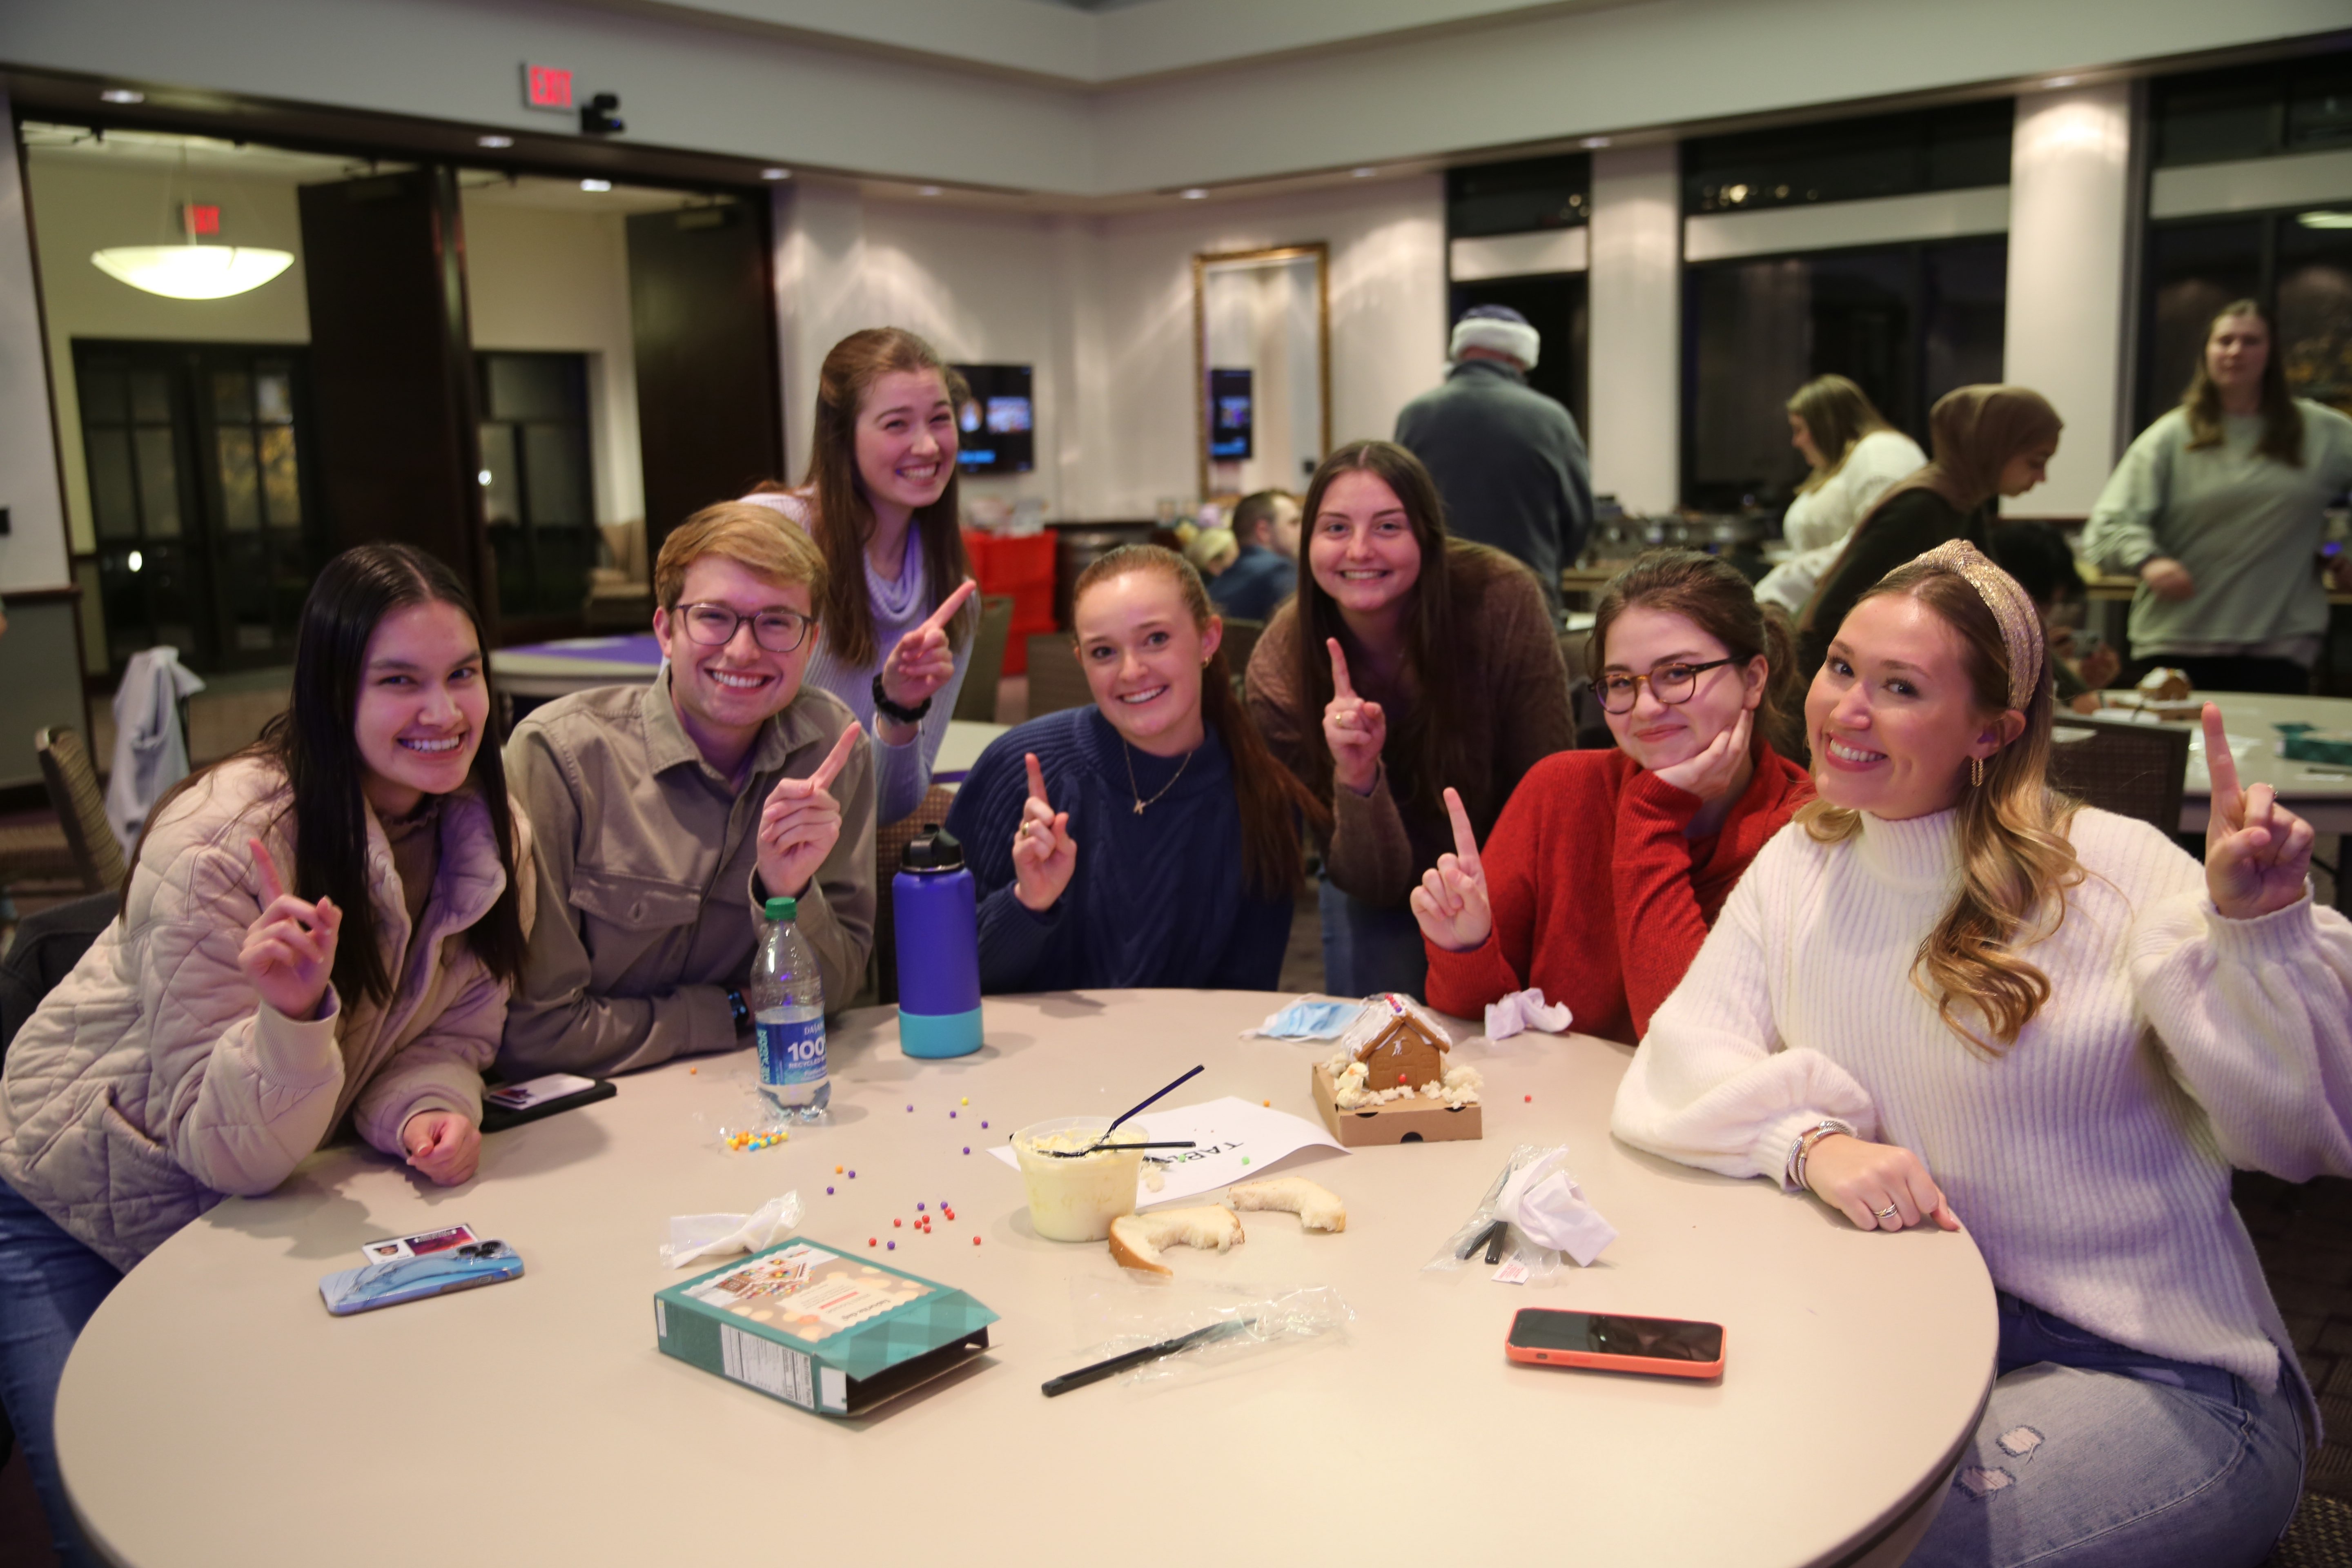 Honors mentors and mentees building gingerbread houses together at the year end celebration